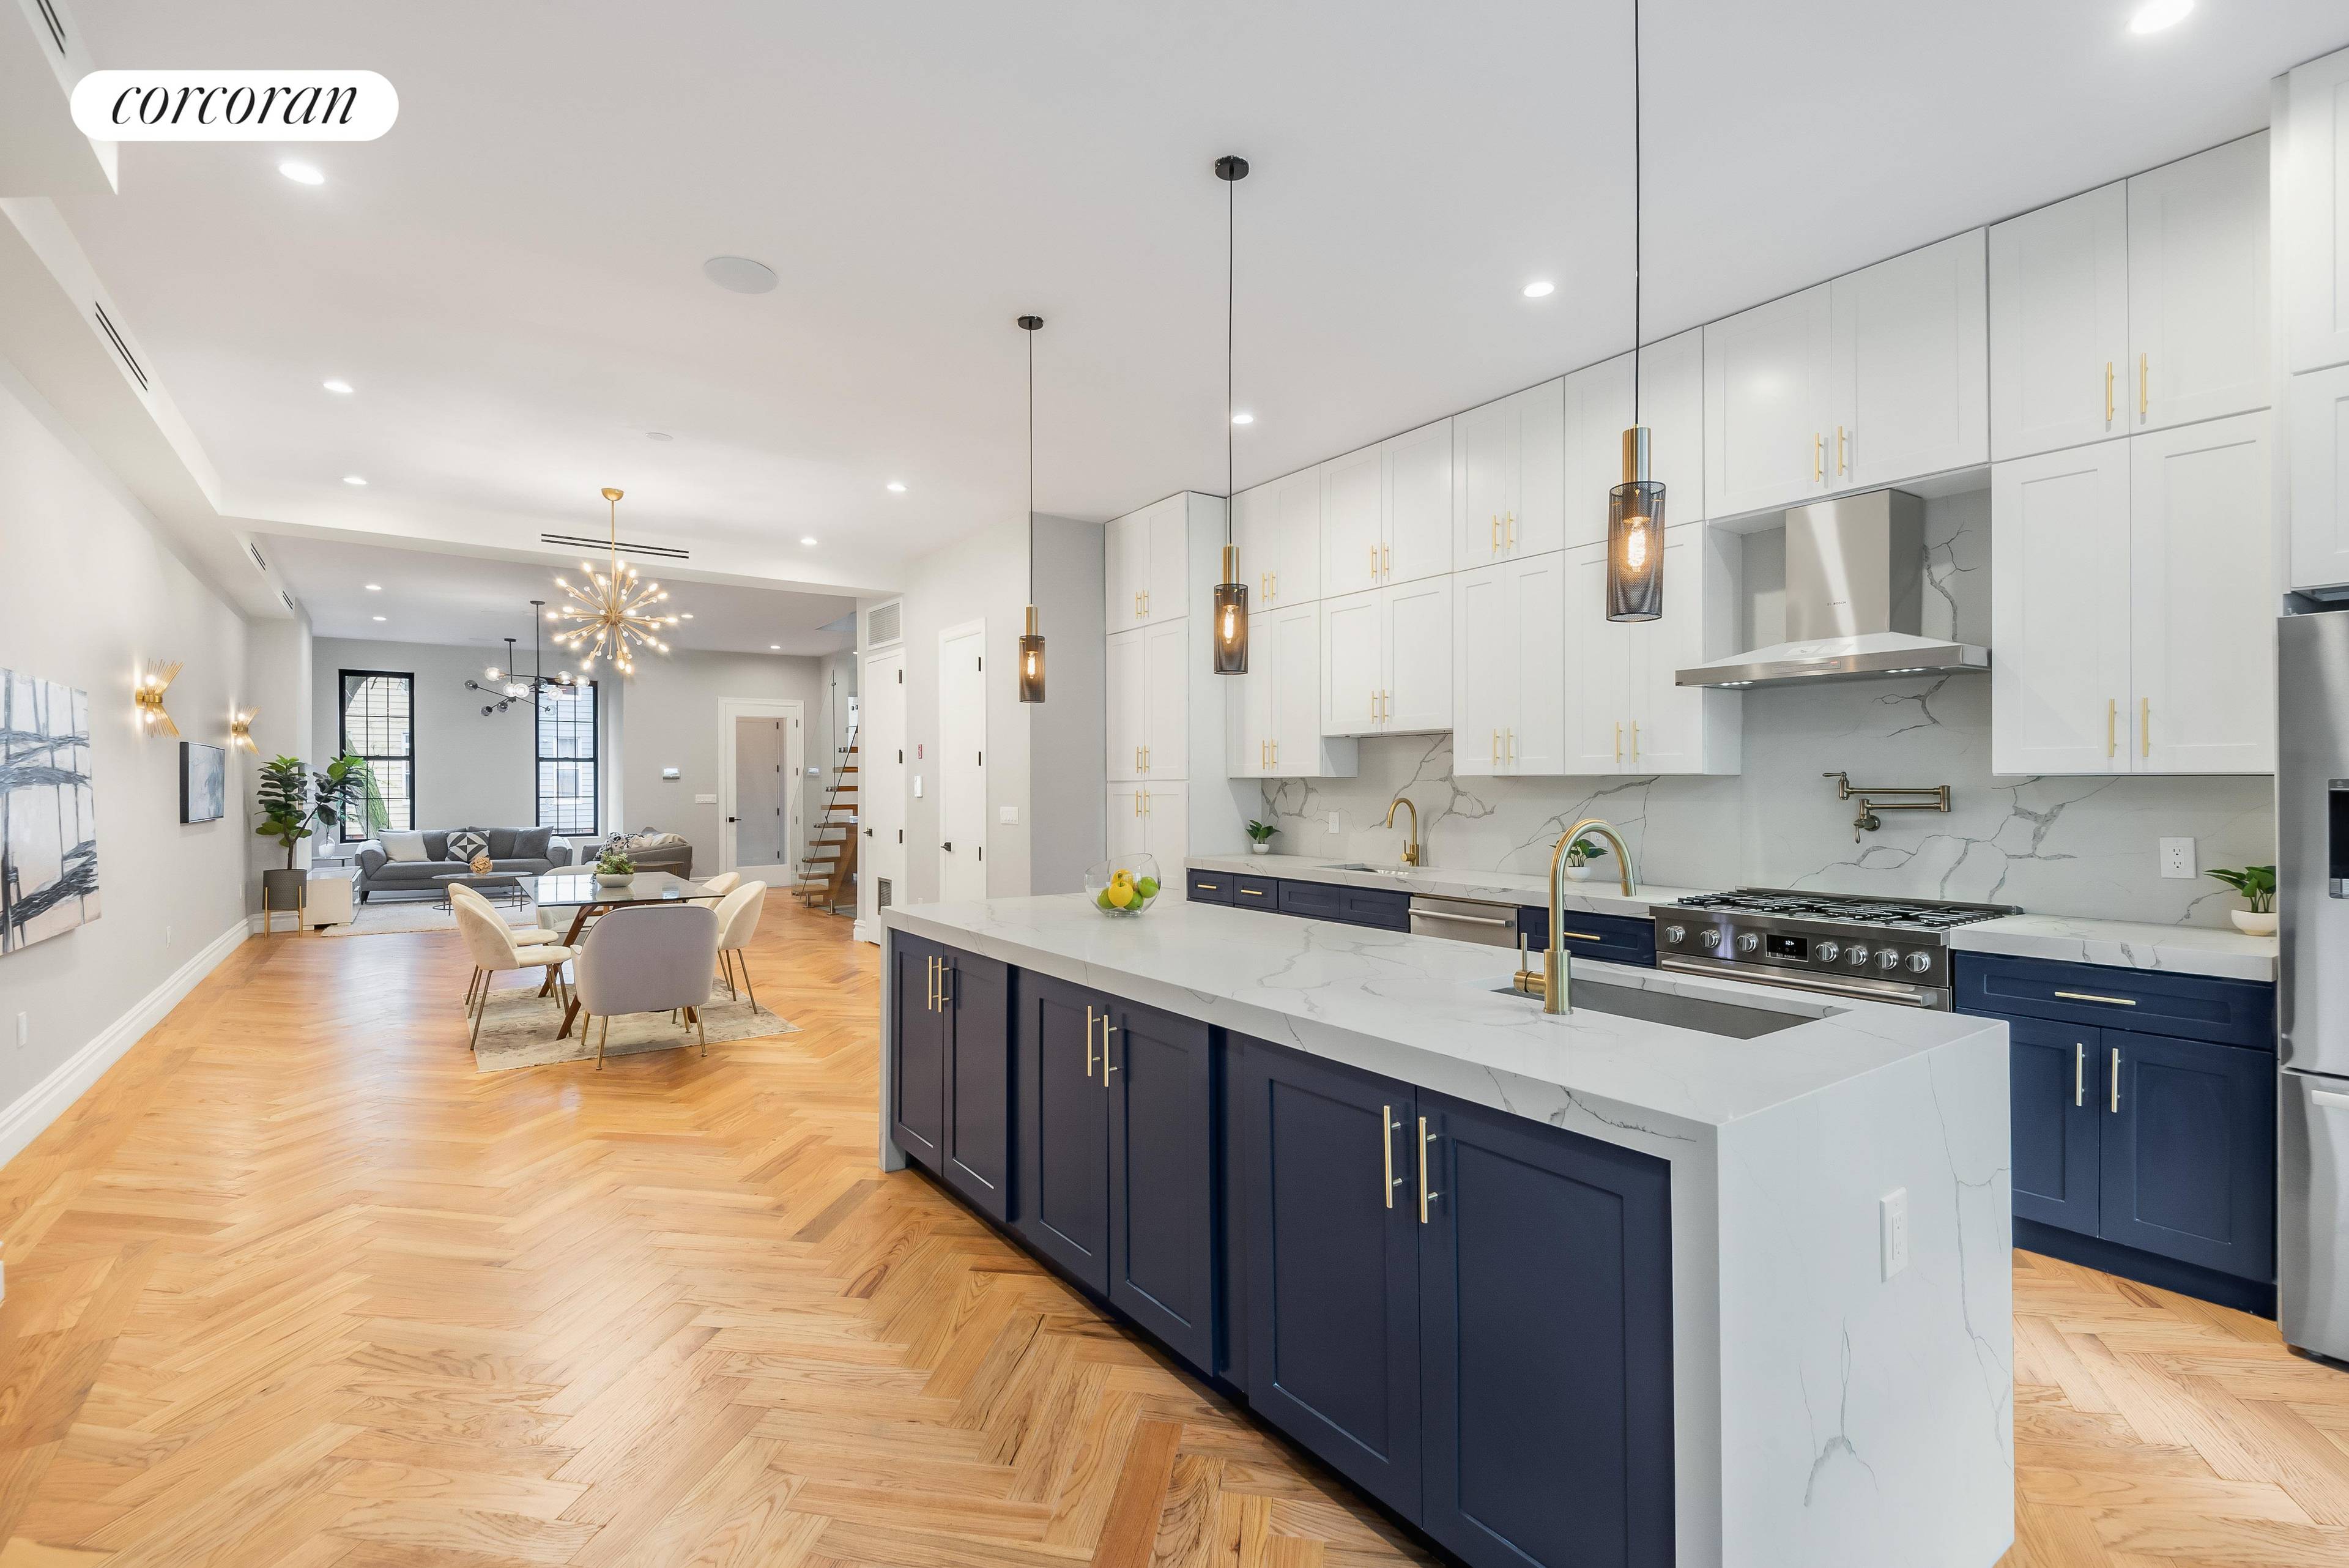 Welcome to 79 Weirfield Street, a beautifully renovated, 3, 000 square foot, two family townhouse, with GARAGE parking, situated in the heart of burgeoning Bushwick !